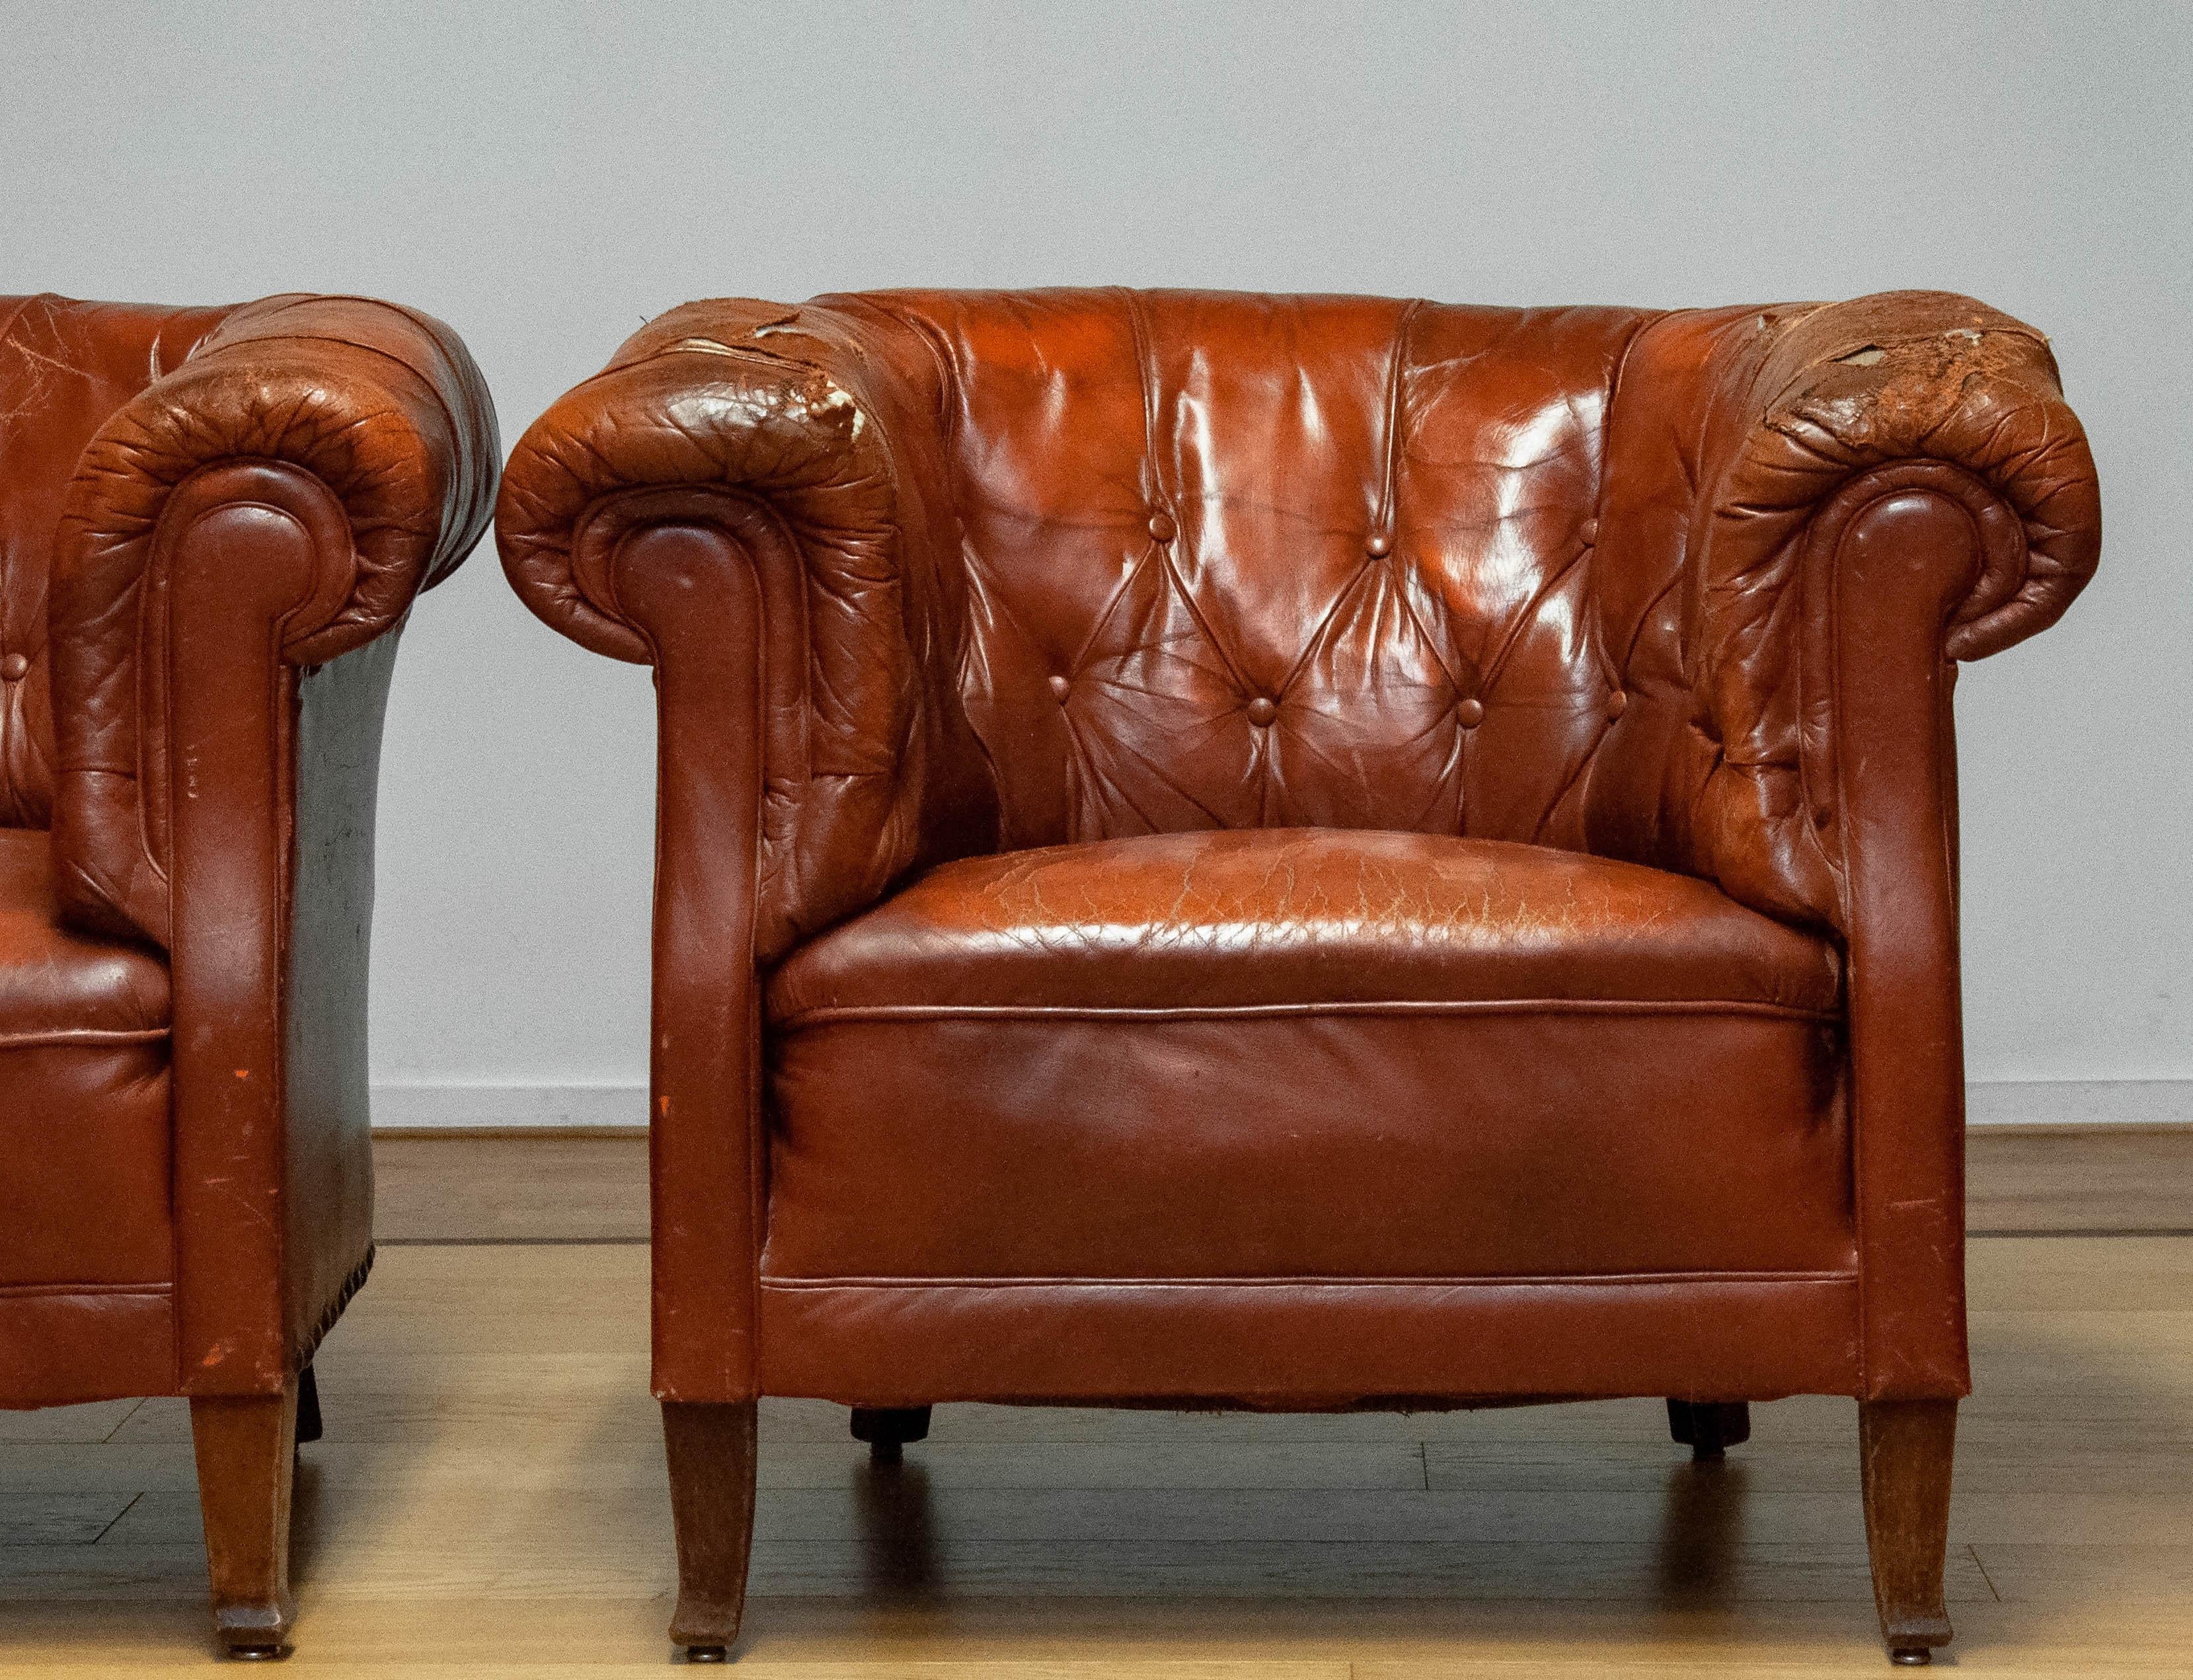 Pair 1940s Swedish Tufted Club Chair 'Chesterfield Model' Tan Brown Worn Leather In Fair Condition In Silvolde, Gelderland